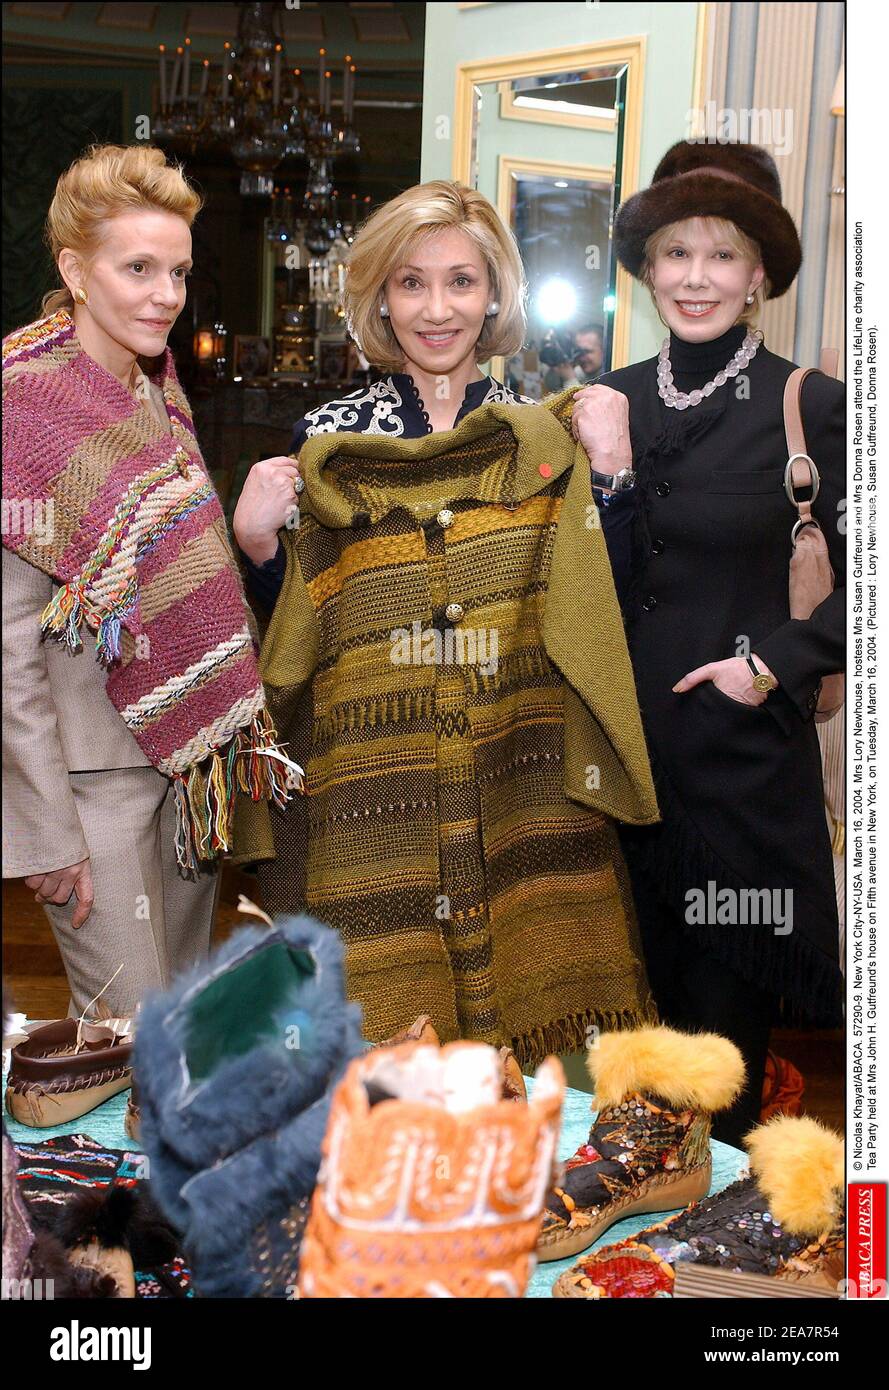 © Nicolas Khayat/ABACA. 57290-9. New York City-NY-USA. March 16, 2004. Mrs Lory Newhouse, hostess Mrs Susan Gutfreund and Mrs Donna Rosen attend the LifeLine charity association Tea Party held at Mrs John H. Gutfreund's house on Fifth avenue in New York, on Tuesday, March 16, 2004. (Pictured : Lory Newhouse, Susan Gutfreund, Donna Rosen). Stock Photo